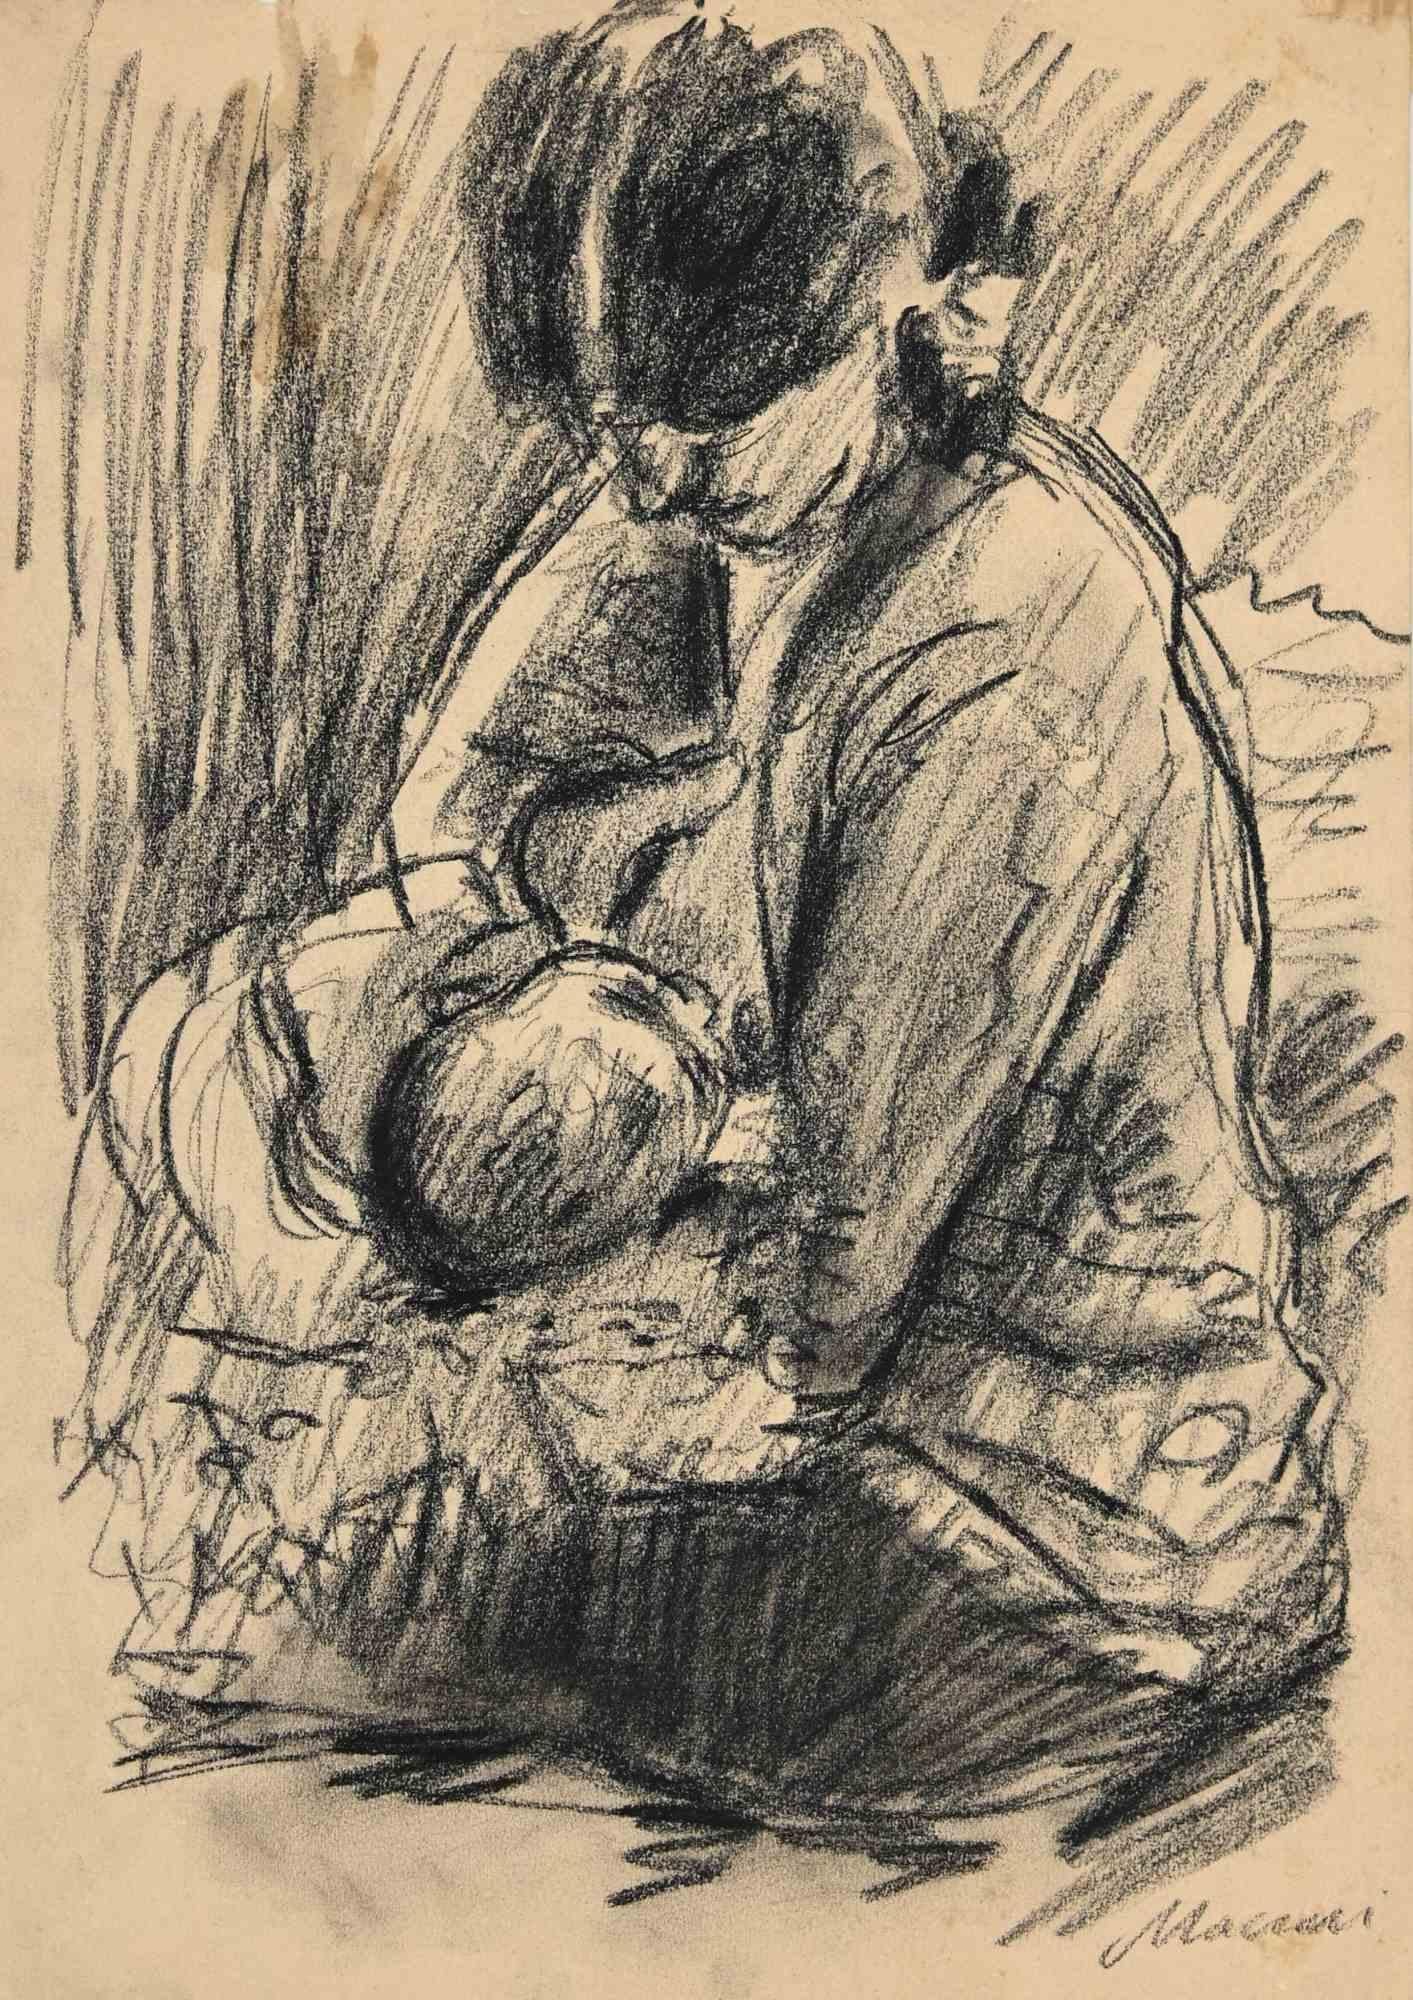 Feeding Time is an original Charcoal Drawing realized by Mino Maccari in mid-20th century.

Good condition on a yellowed paper.

Hand-signed by the artist with pencil.

Mino Maccari (1898-1989) was an Italian writer, painter, engraver and